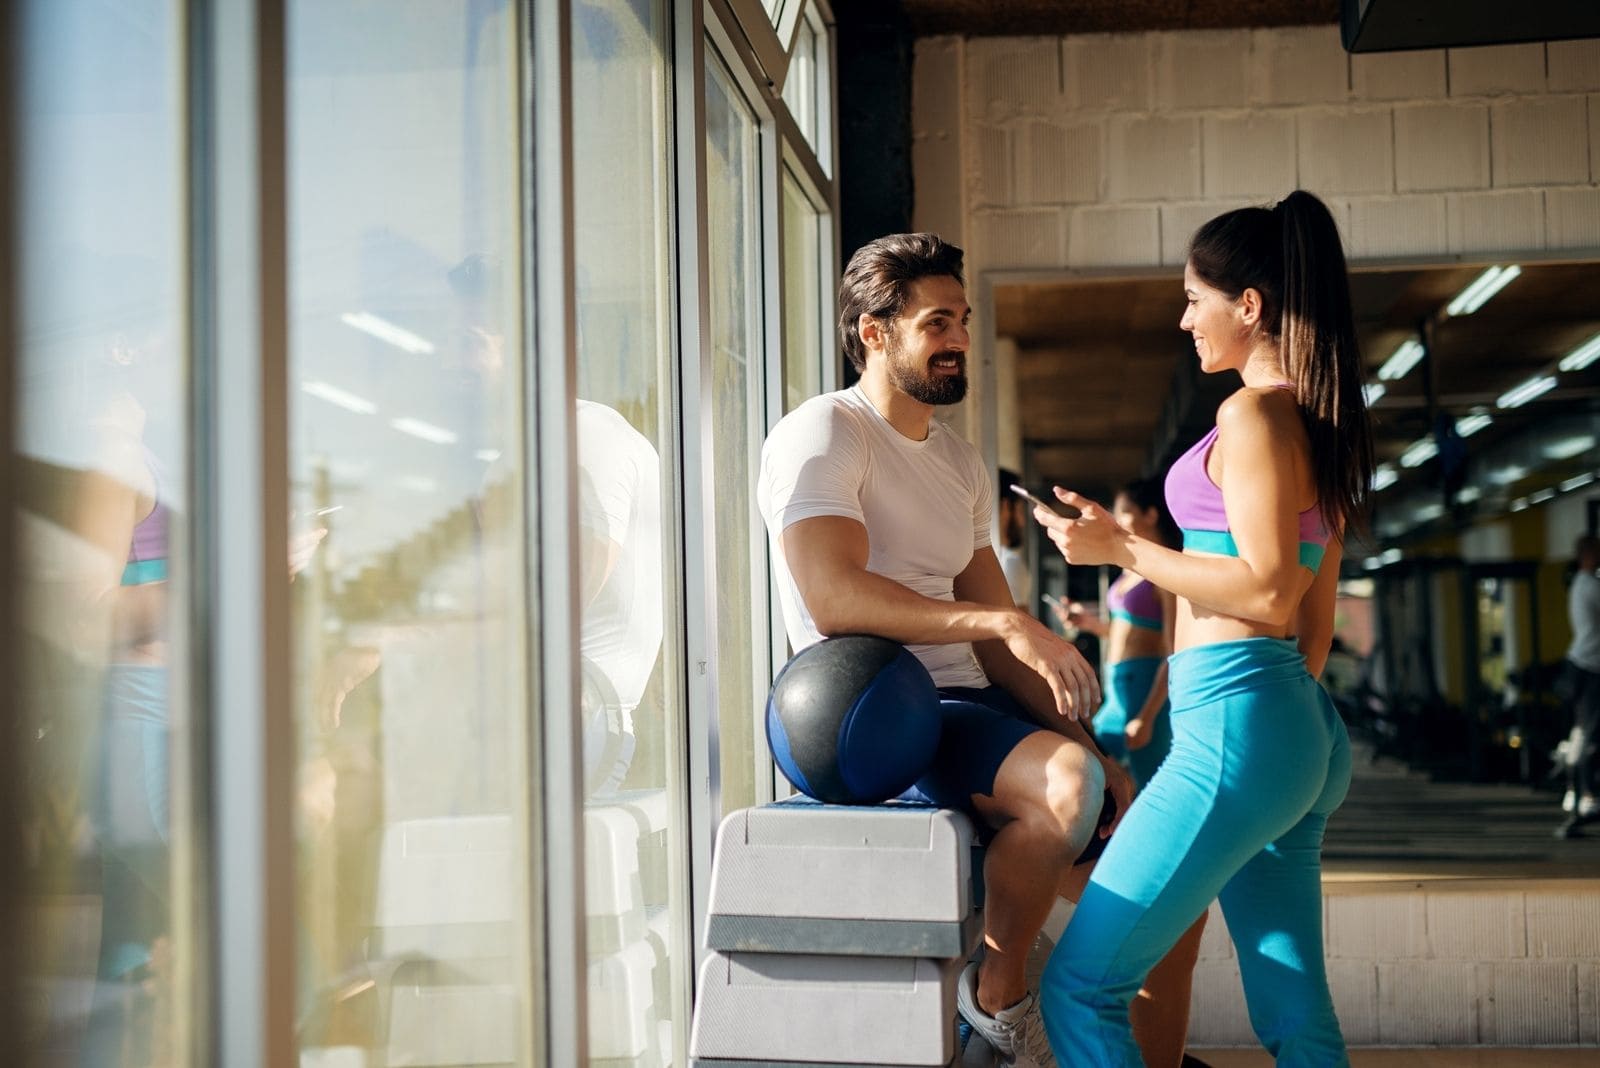 shaped sporty girl flirting with a guy in the gym holding a smartphone